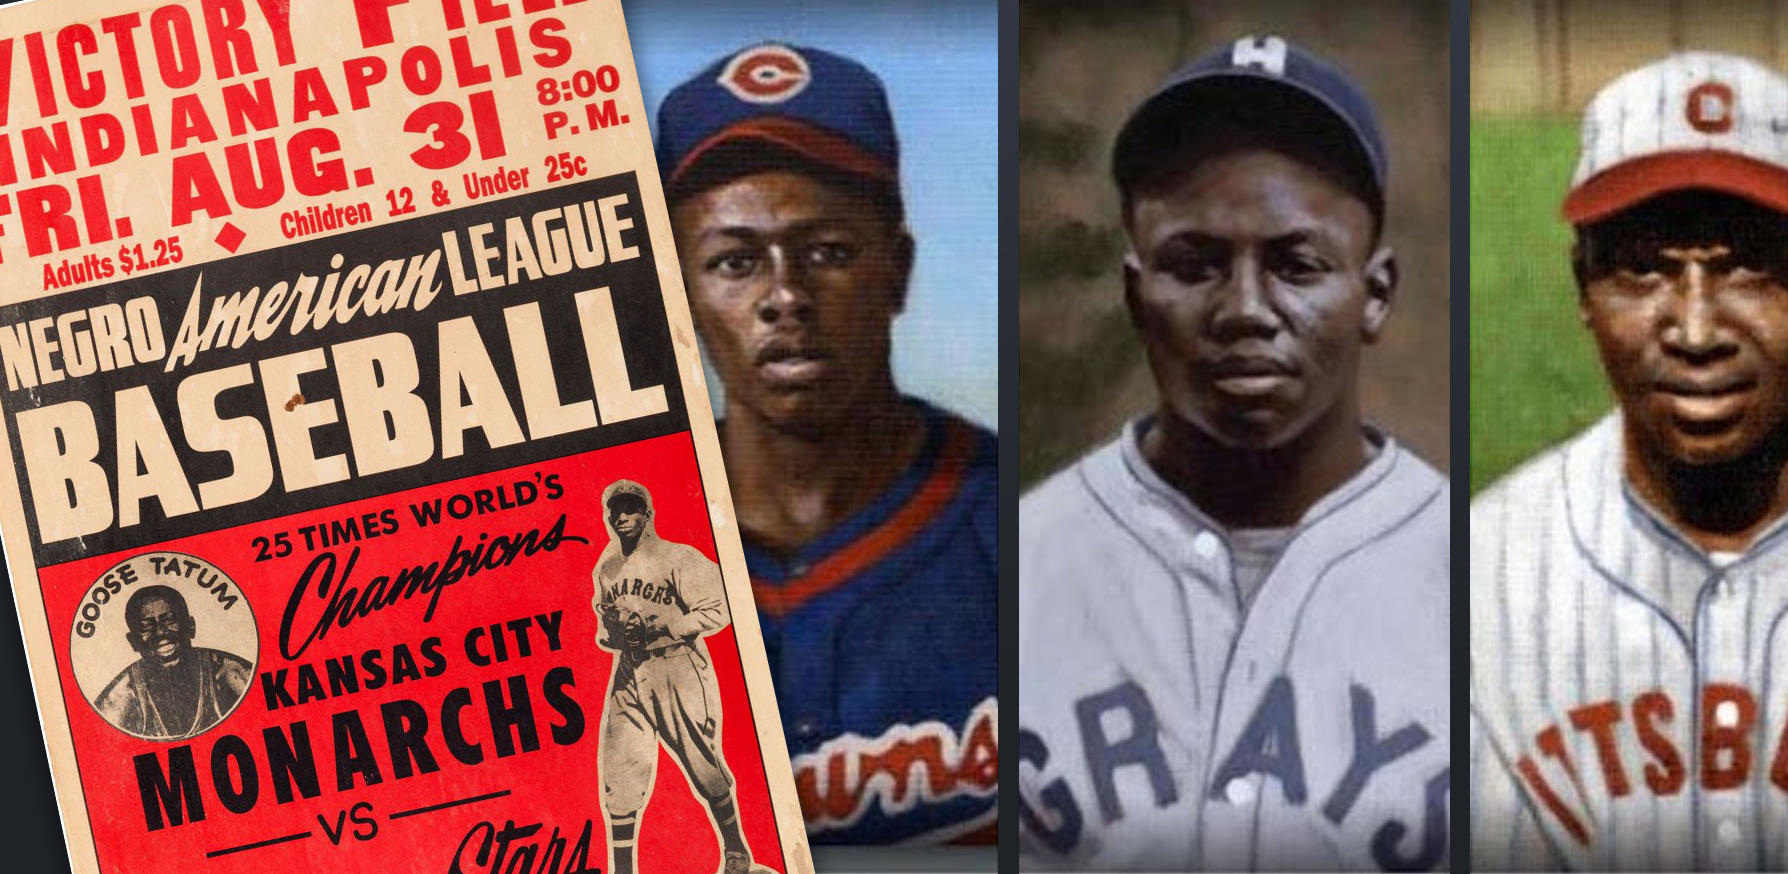 Dick Wehner on X: Black History Month sporting my Negro Leagues